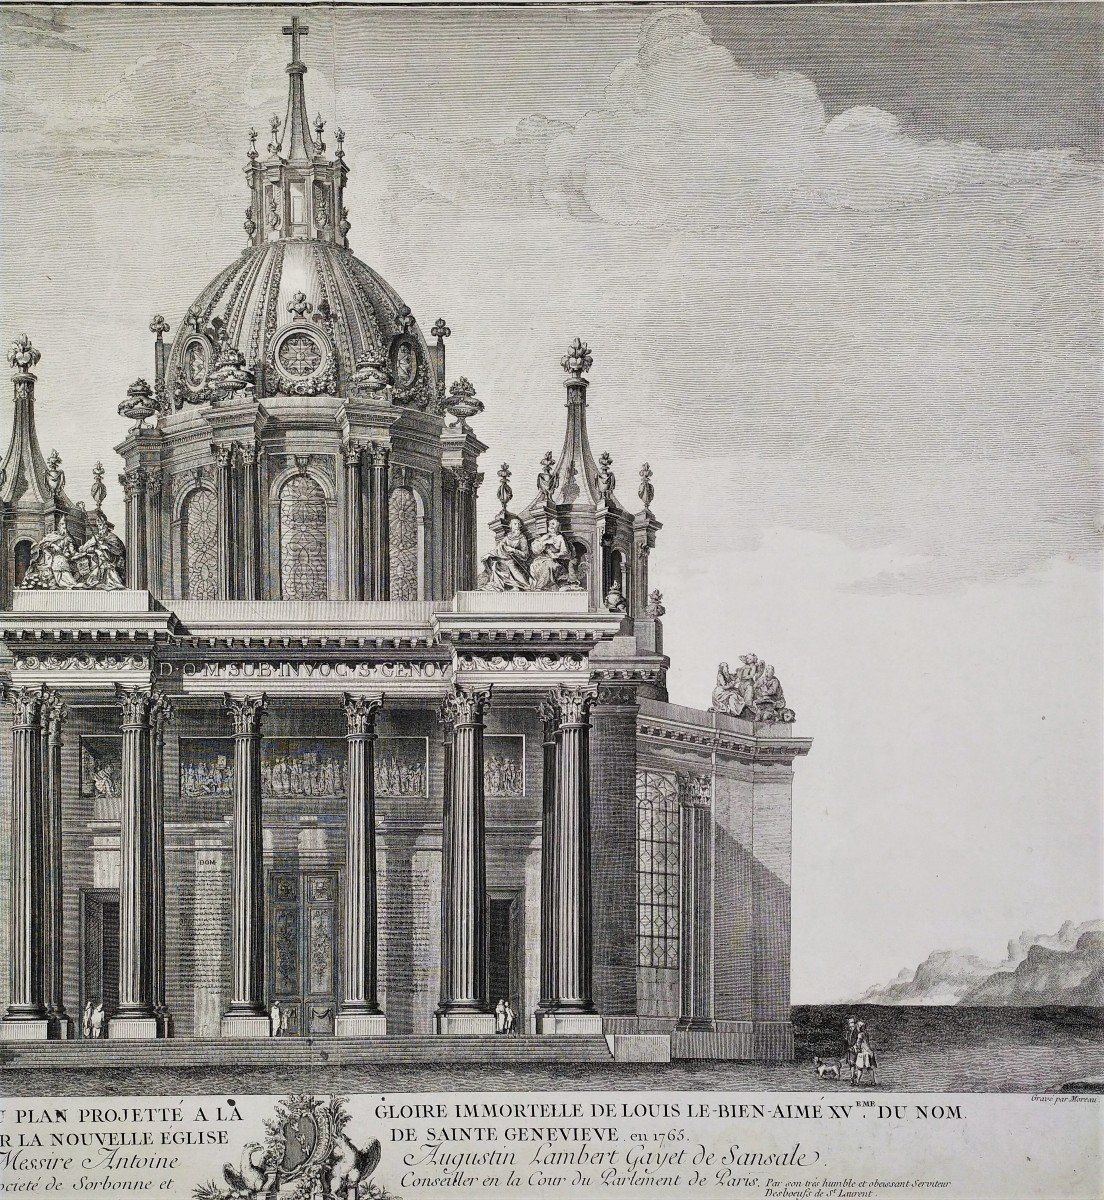 Pantheon Project Architecture Etching 18th C-photo-2